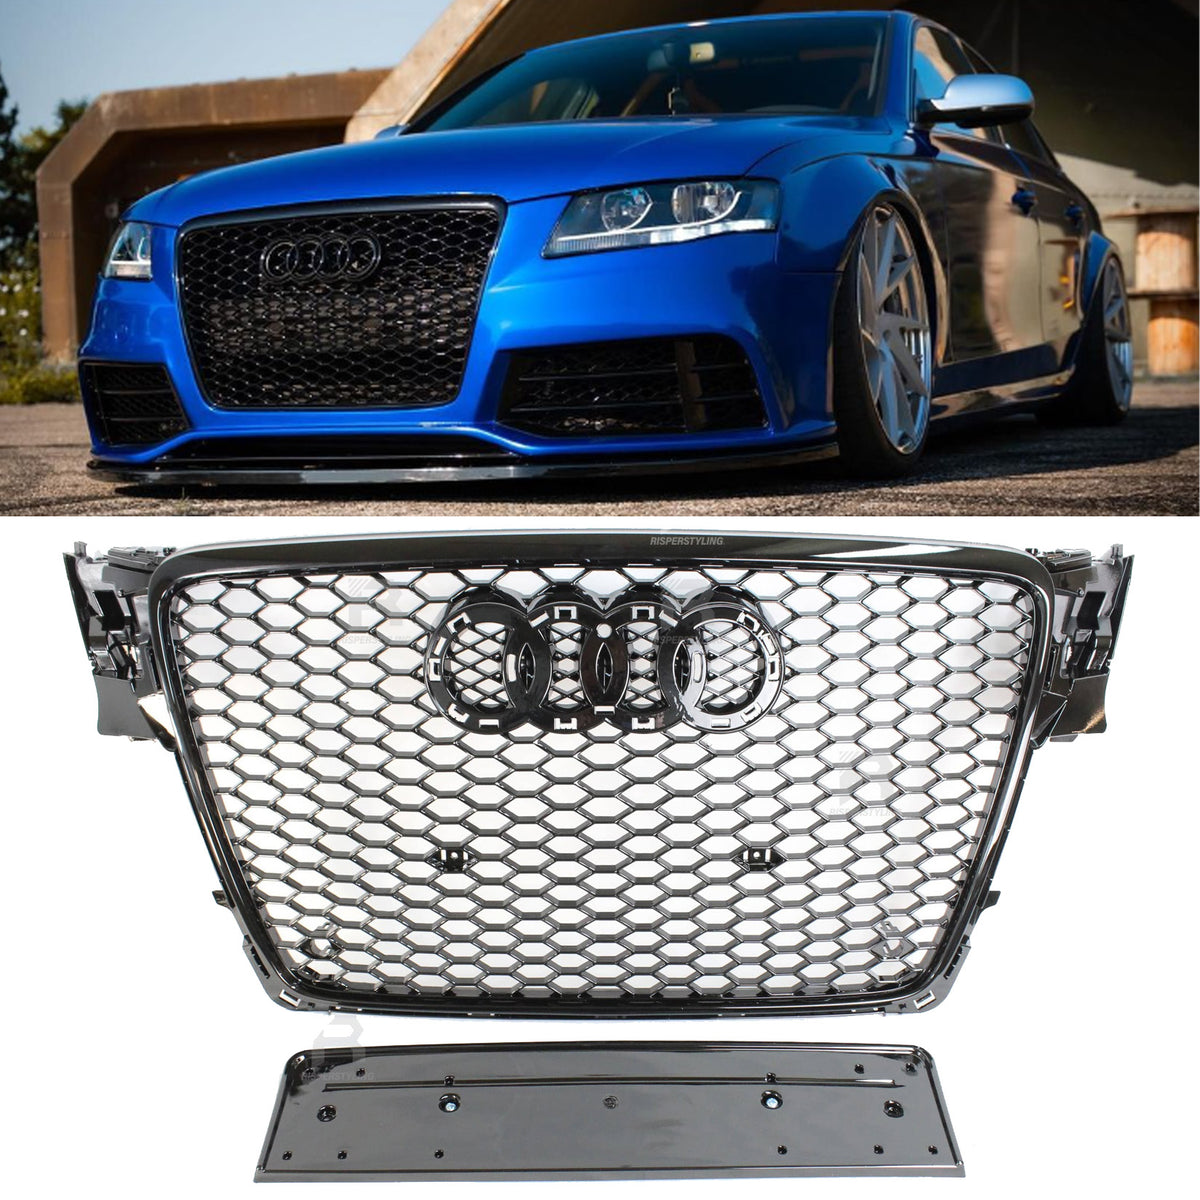 Audi A4 / S4 B8 2008-2012 RS4 Style Gloss Black Honeycomb Grill